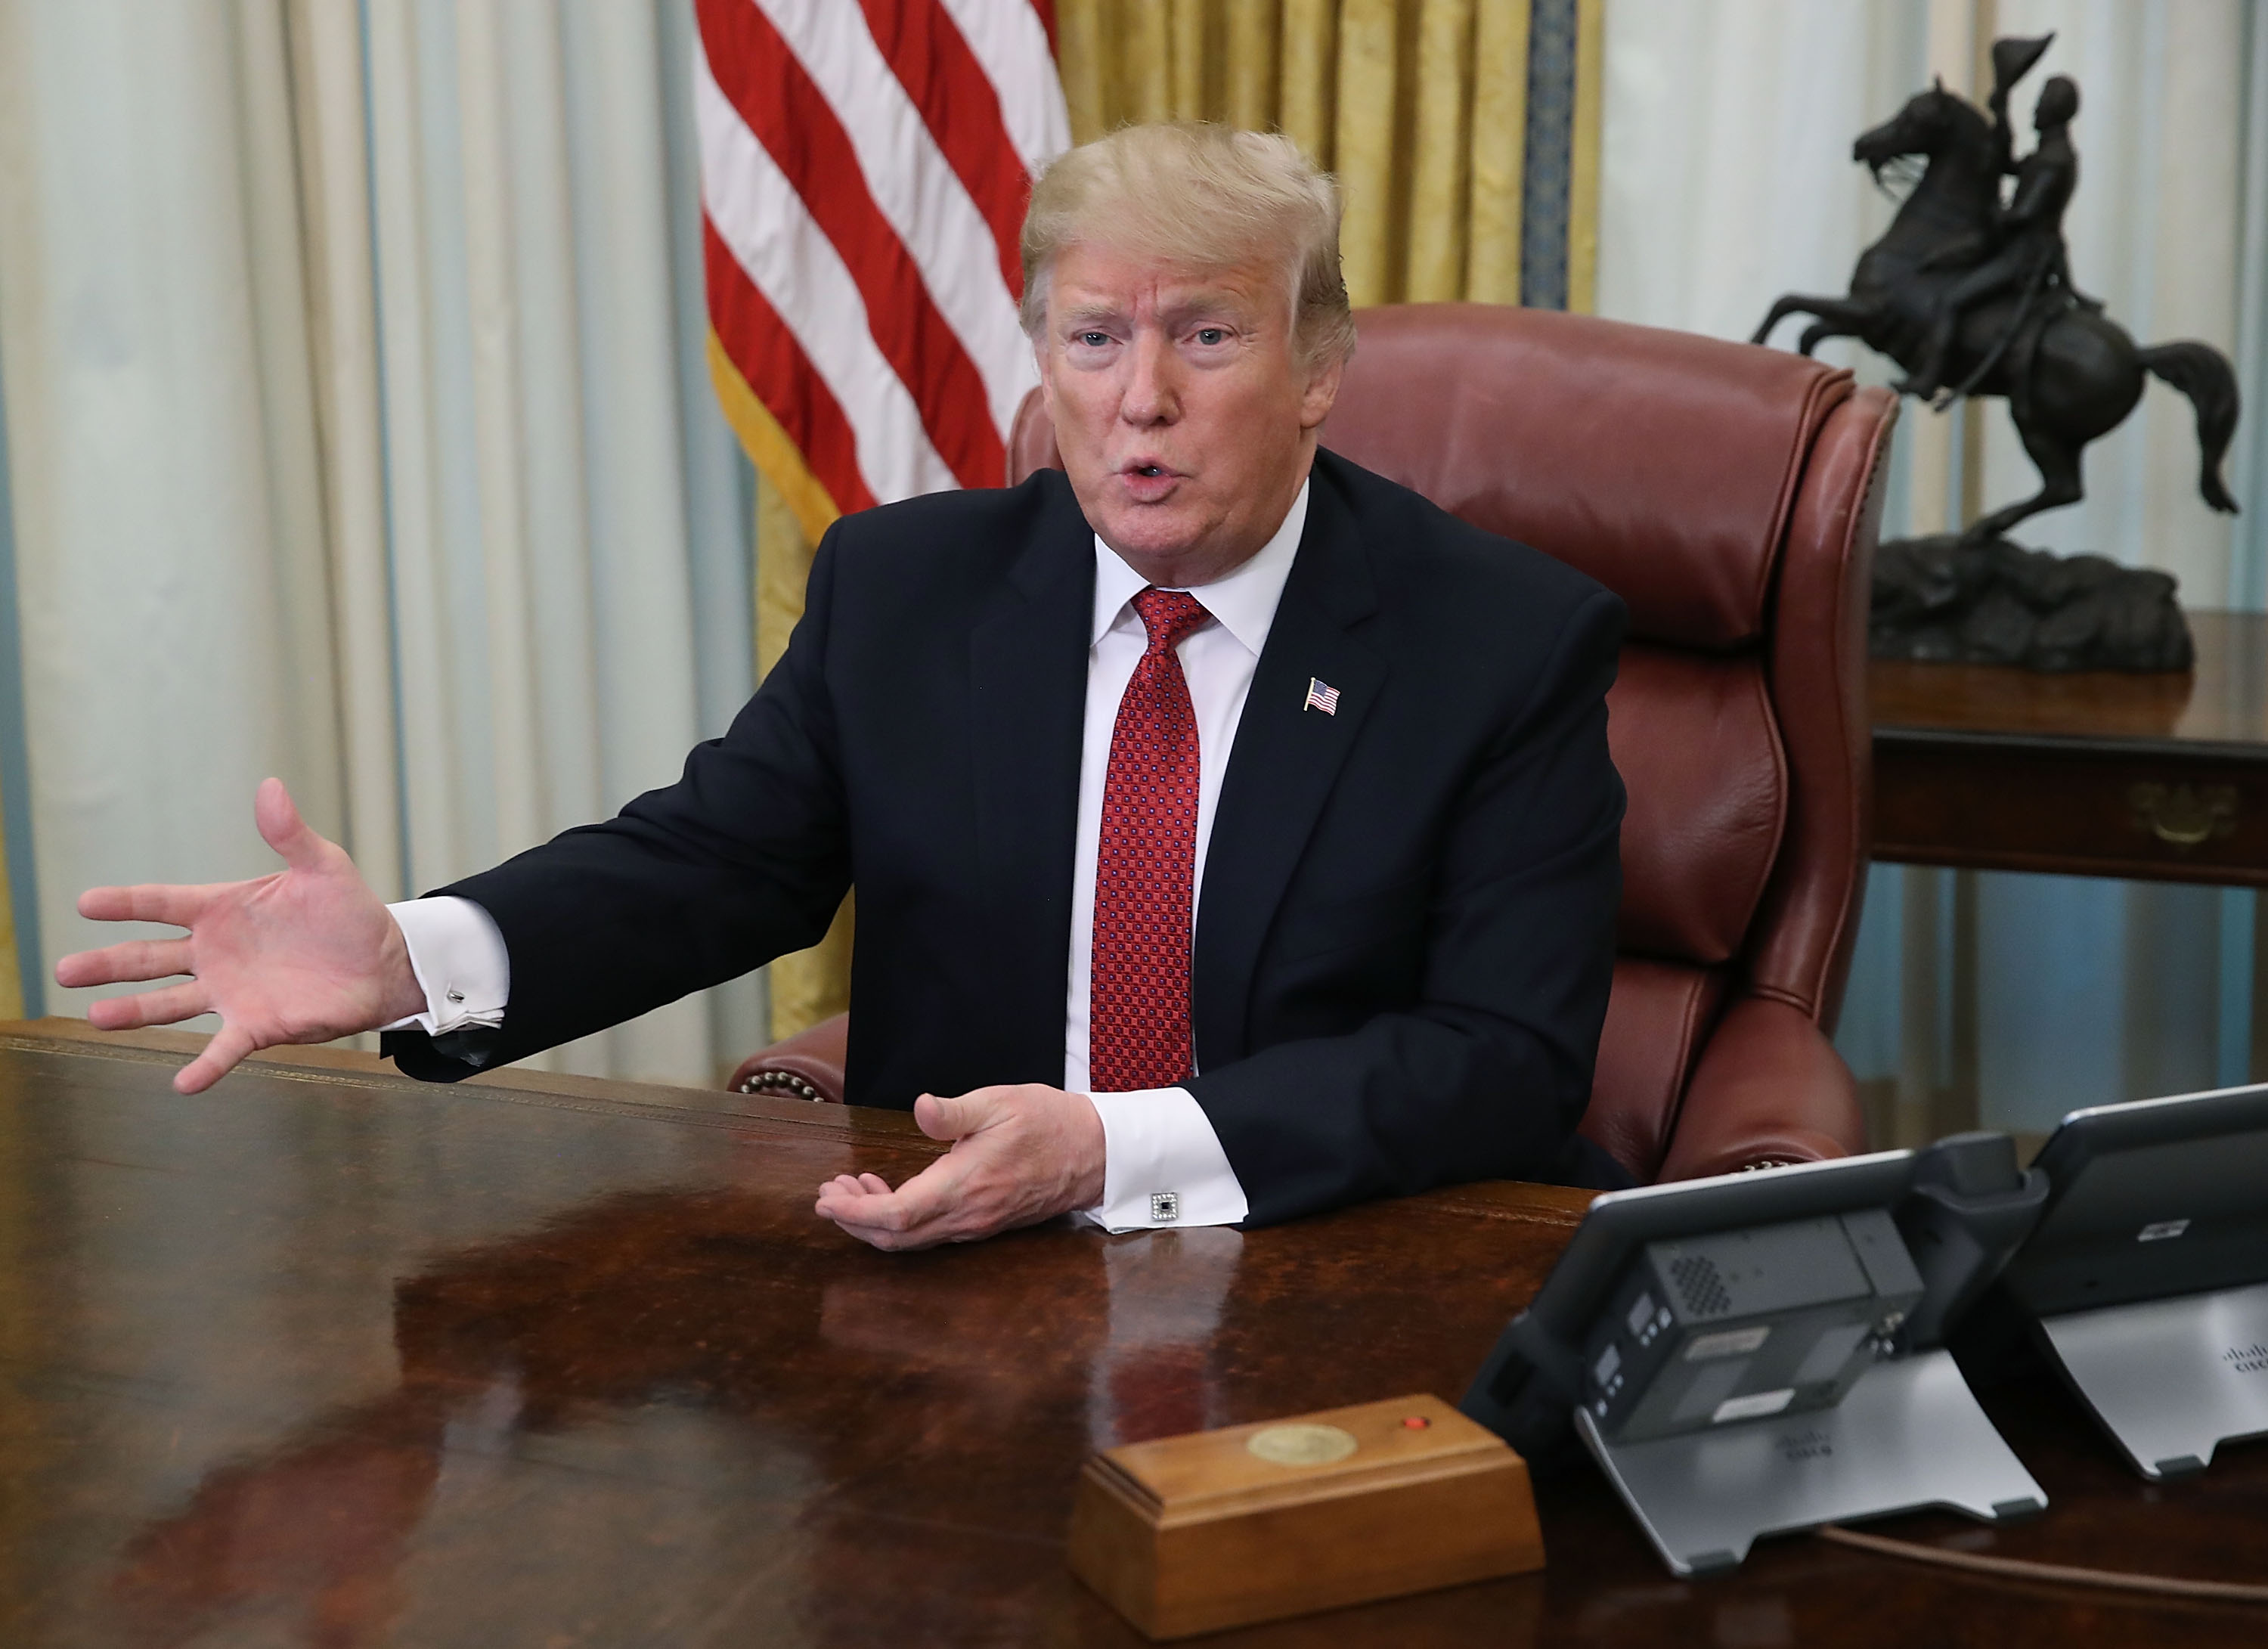 U.S. President Donald Trump speaks during a meeting with Chinese Vice Premier Liu He in the Oval Office at the White House on January 31, 2019 in Washington, D.C., the same day he met with his intelligence chiefs (Mark Wilson&mdash;Getty Images)